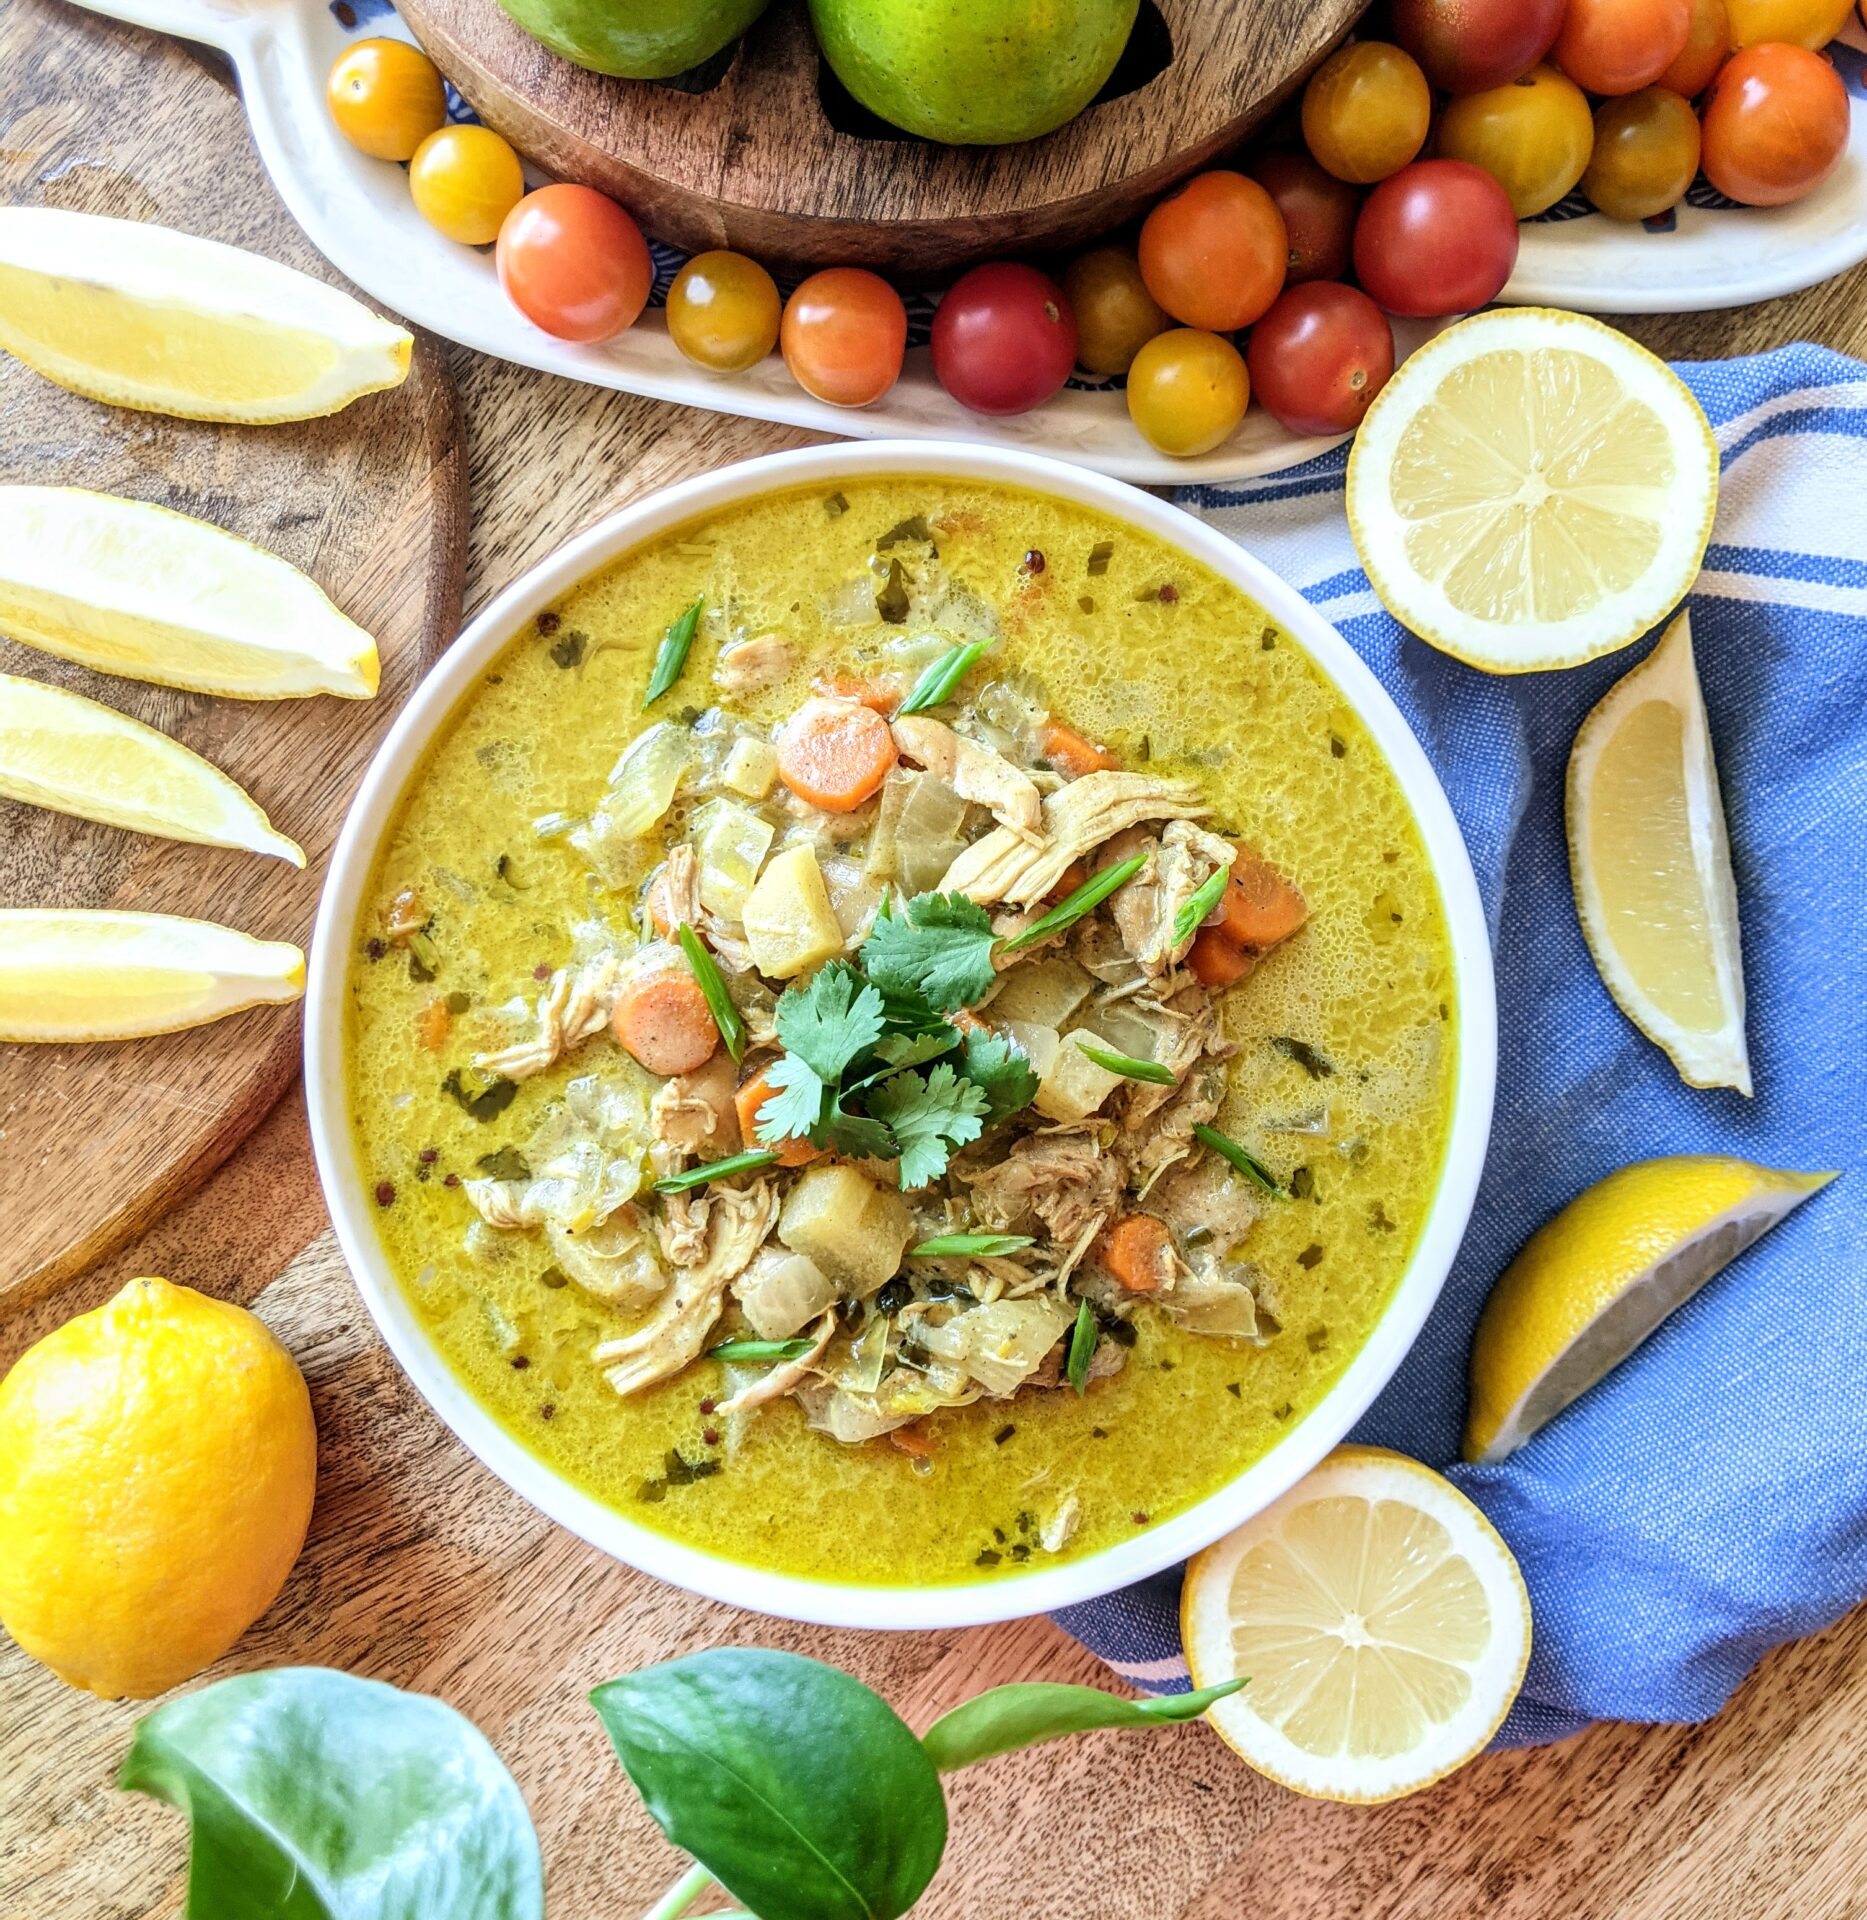 A bowl of vibrant lemon and curry soup, loaded with shredded chicken, apples, carrots, celery, and basmati rice.